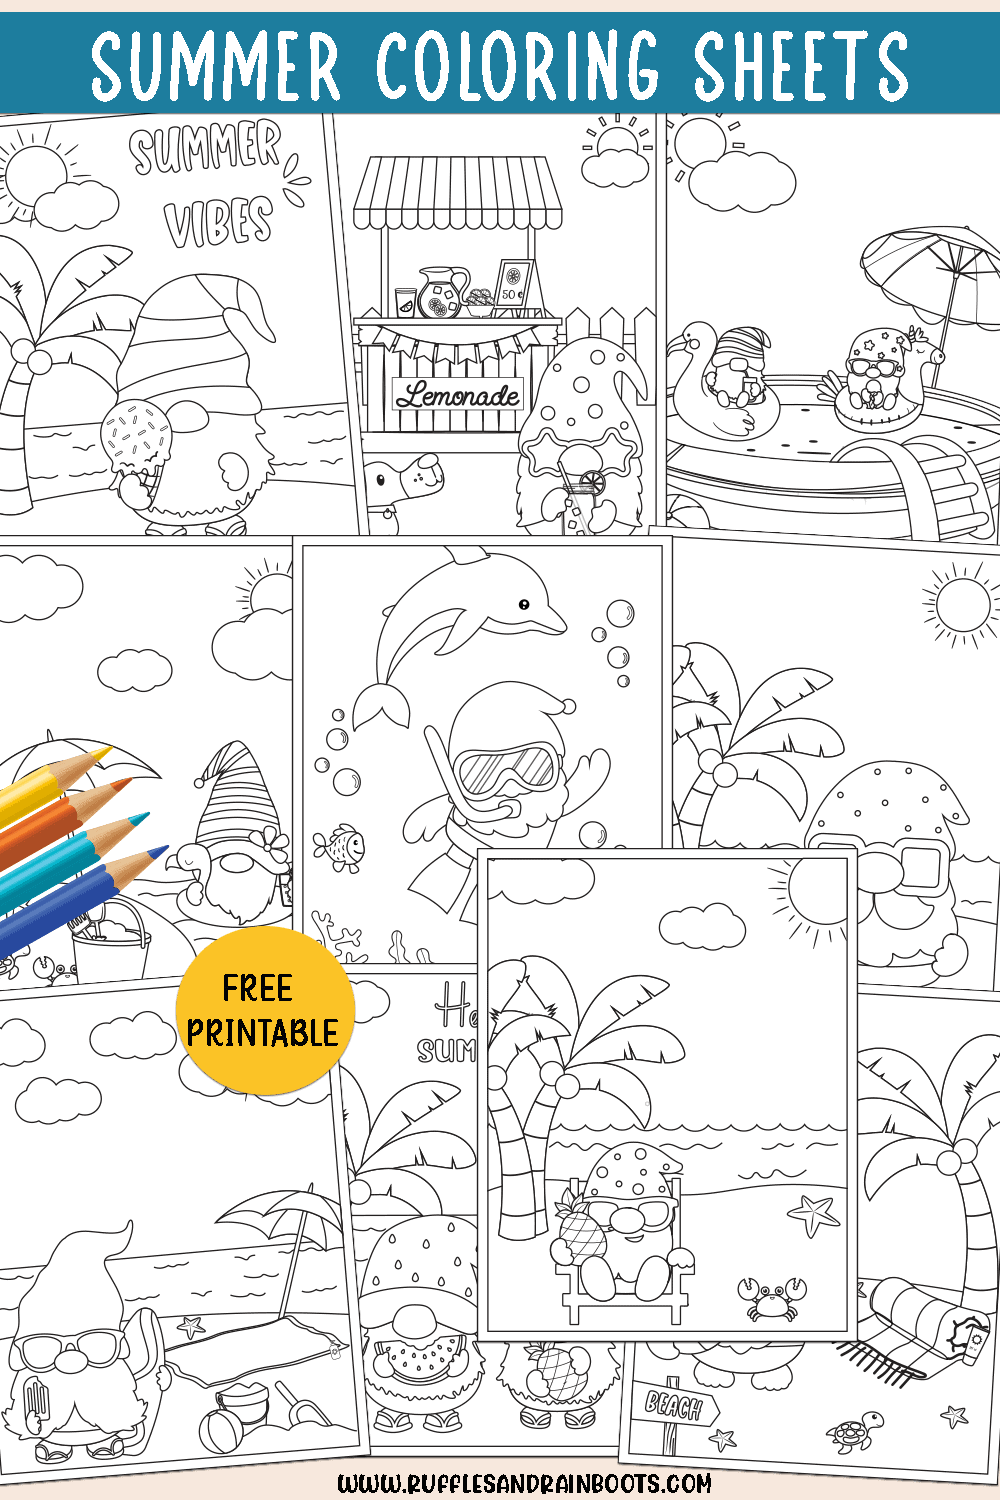 Vertical image of collage of 10 gnome coloring pages for kids summer edition.